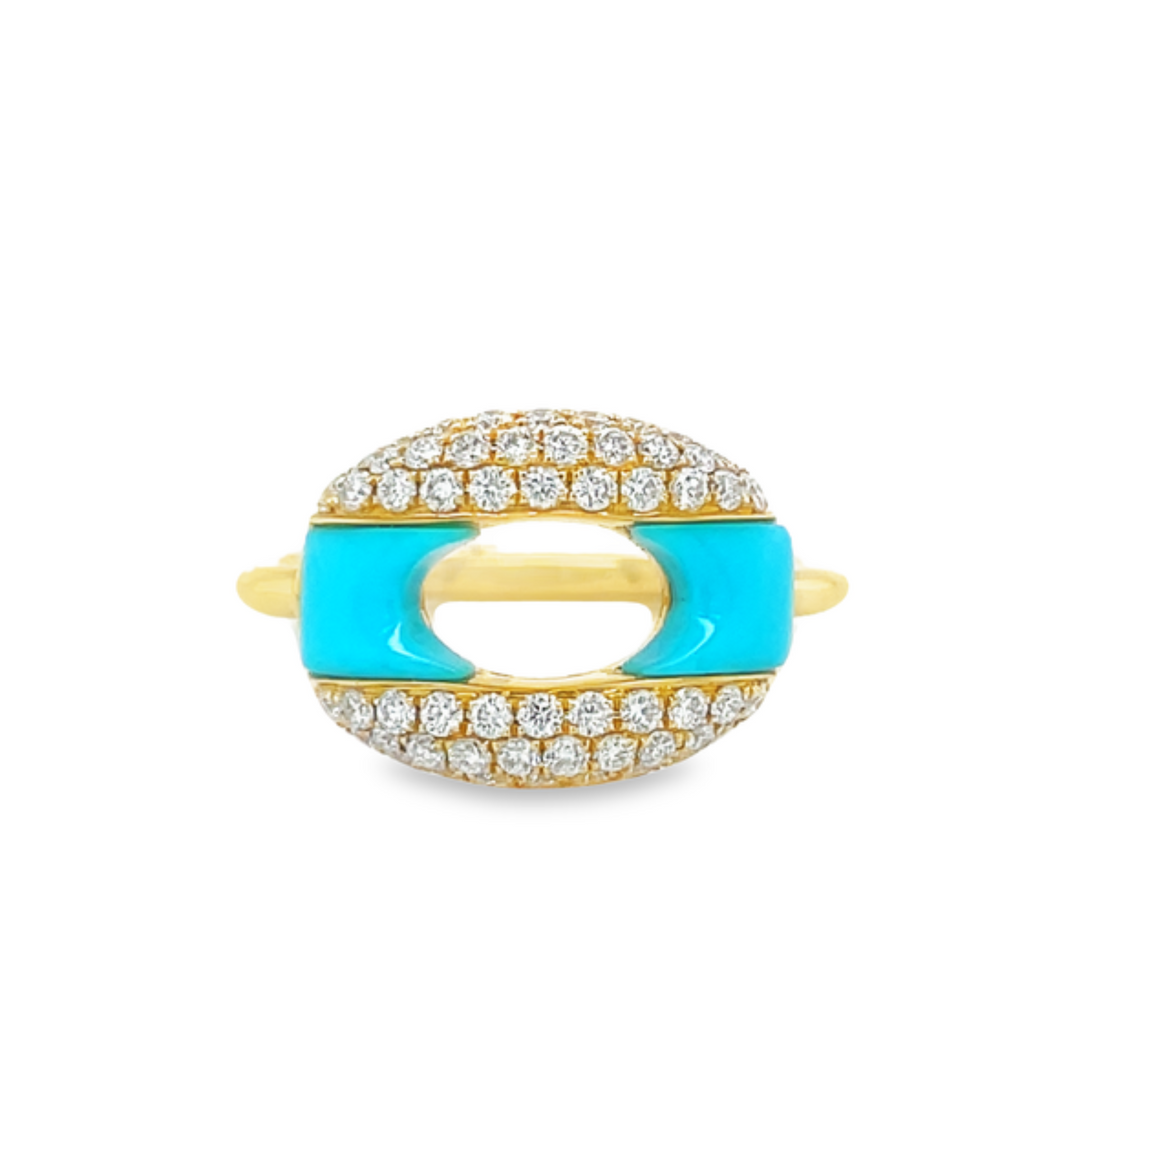 Contemporary design   Bright & bold colors set in sparking diamond pave mountings.  14k white gold.   11.00 mm width   Round diamonds 0.61 cts  6.5 size (sizeable)  0.73 cts turquoise gem